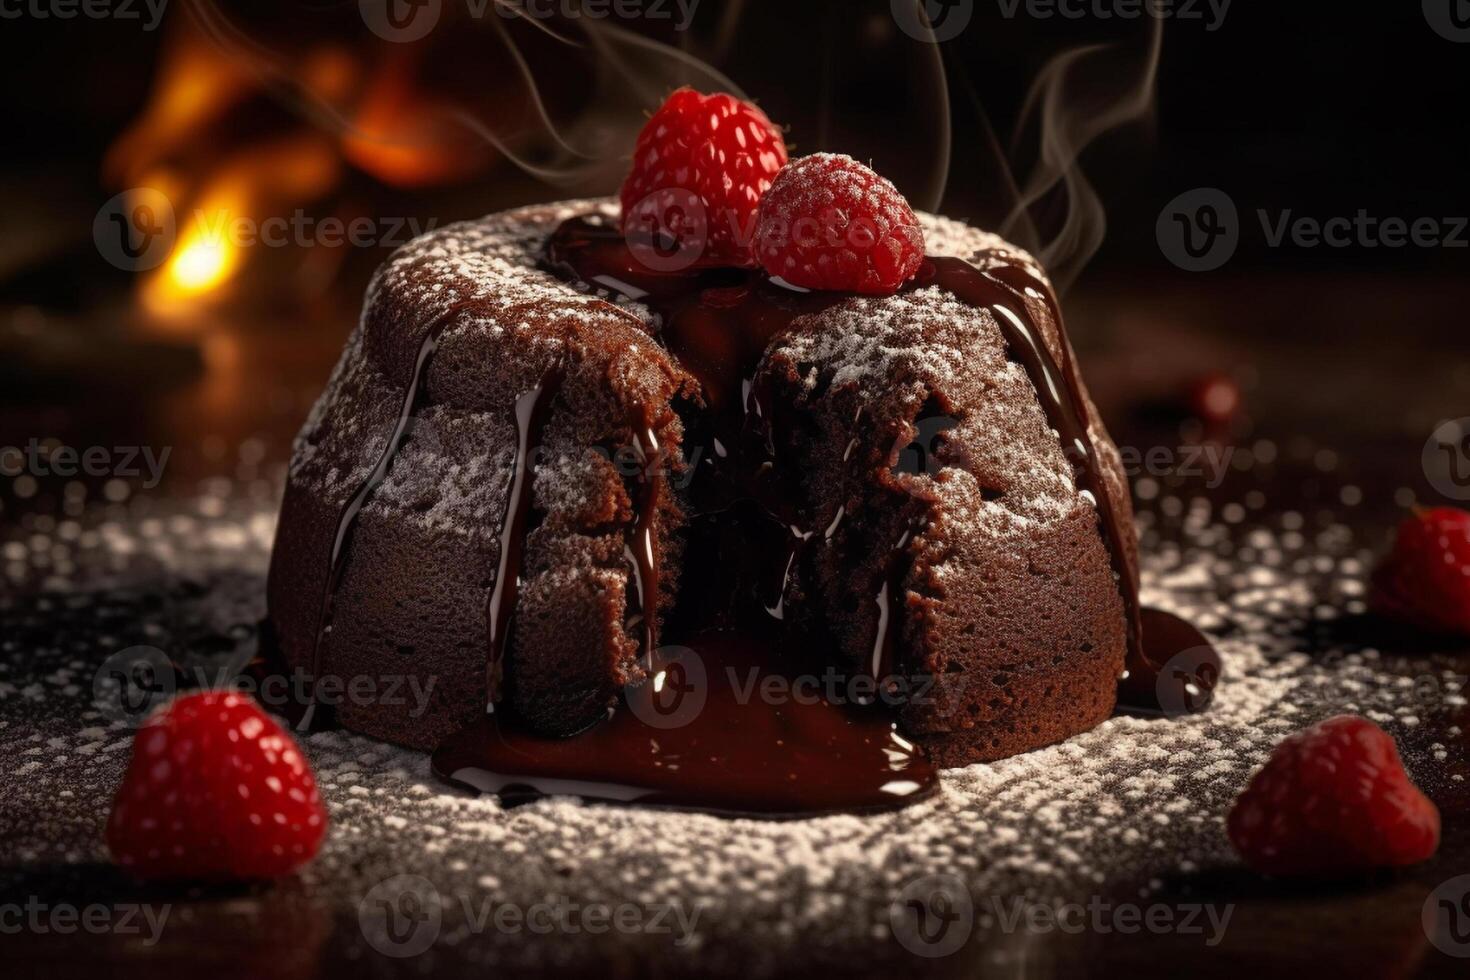 Delicious lava cake on a plate product photography. photo